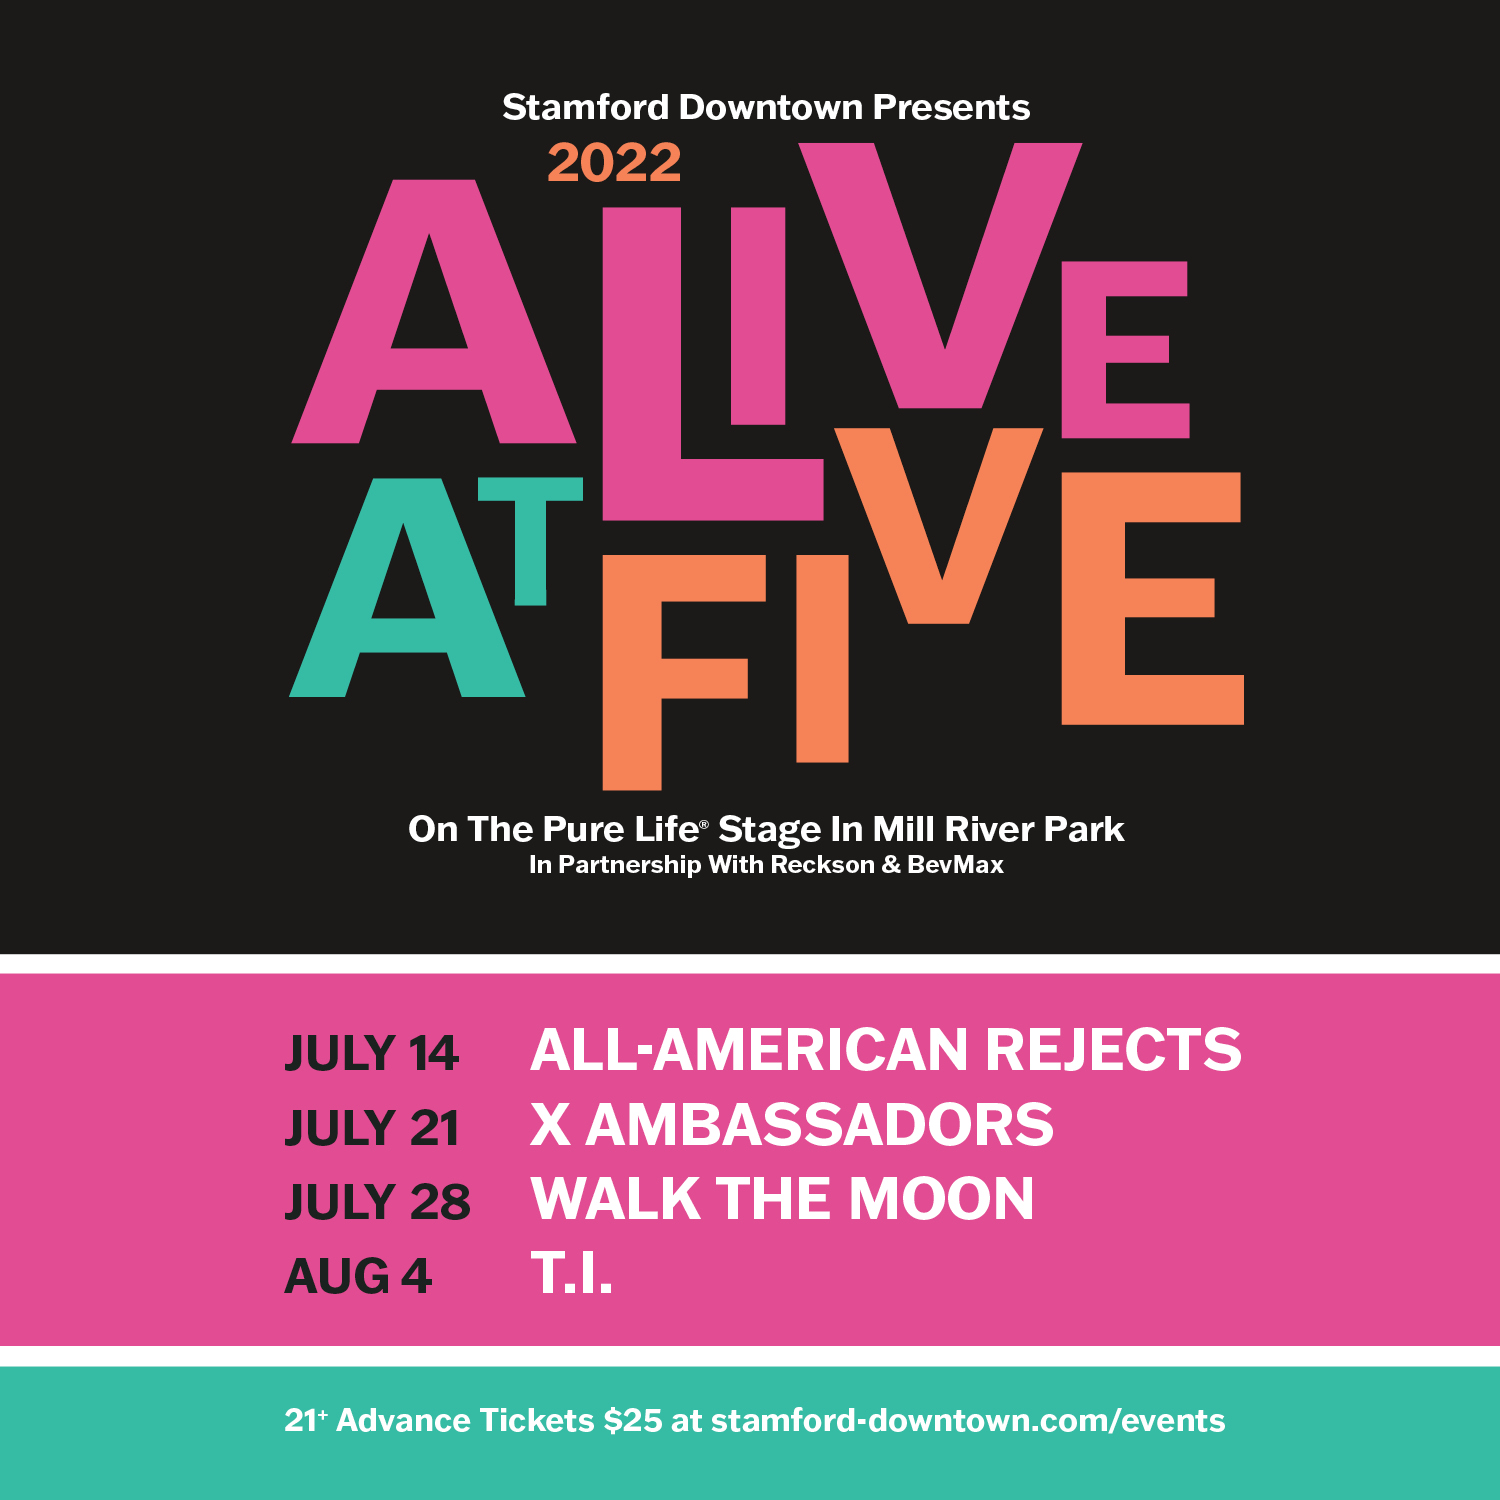 Alive at Five in Stamford: Everything You Need to Know